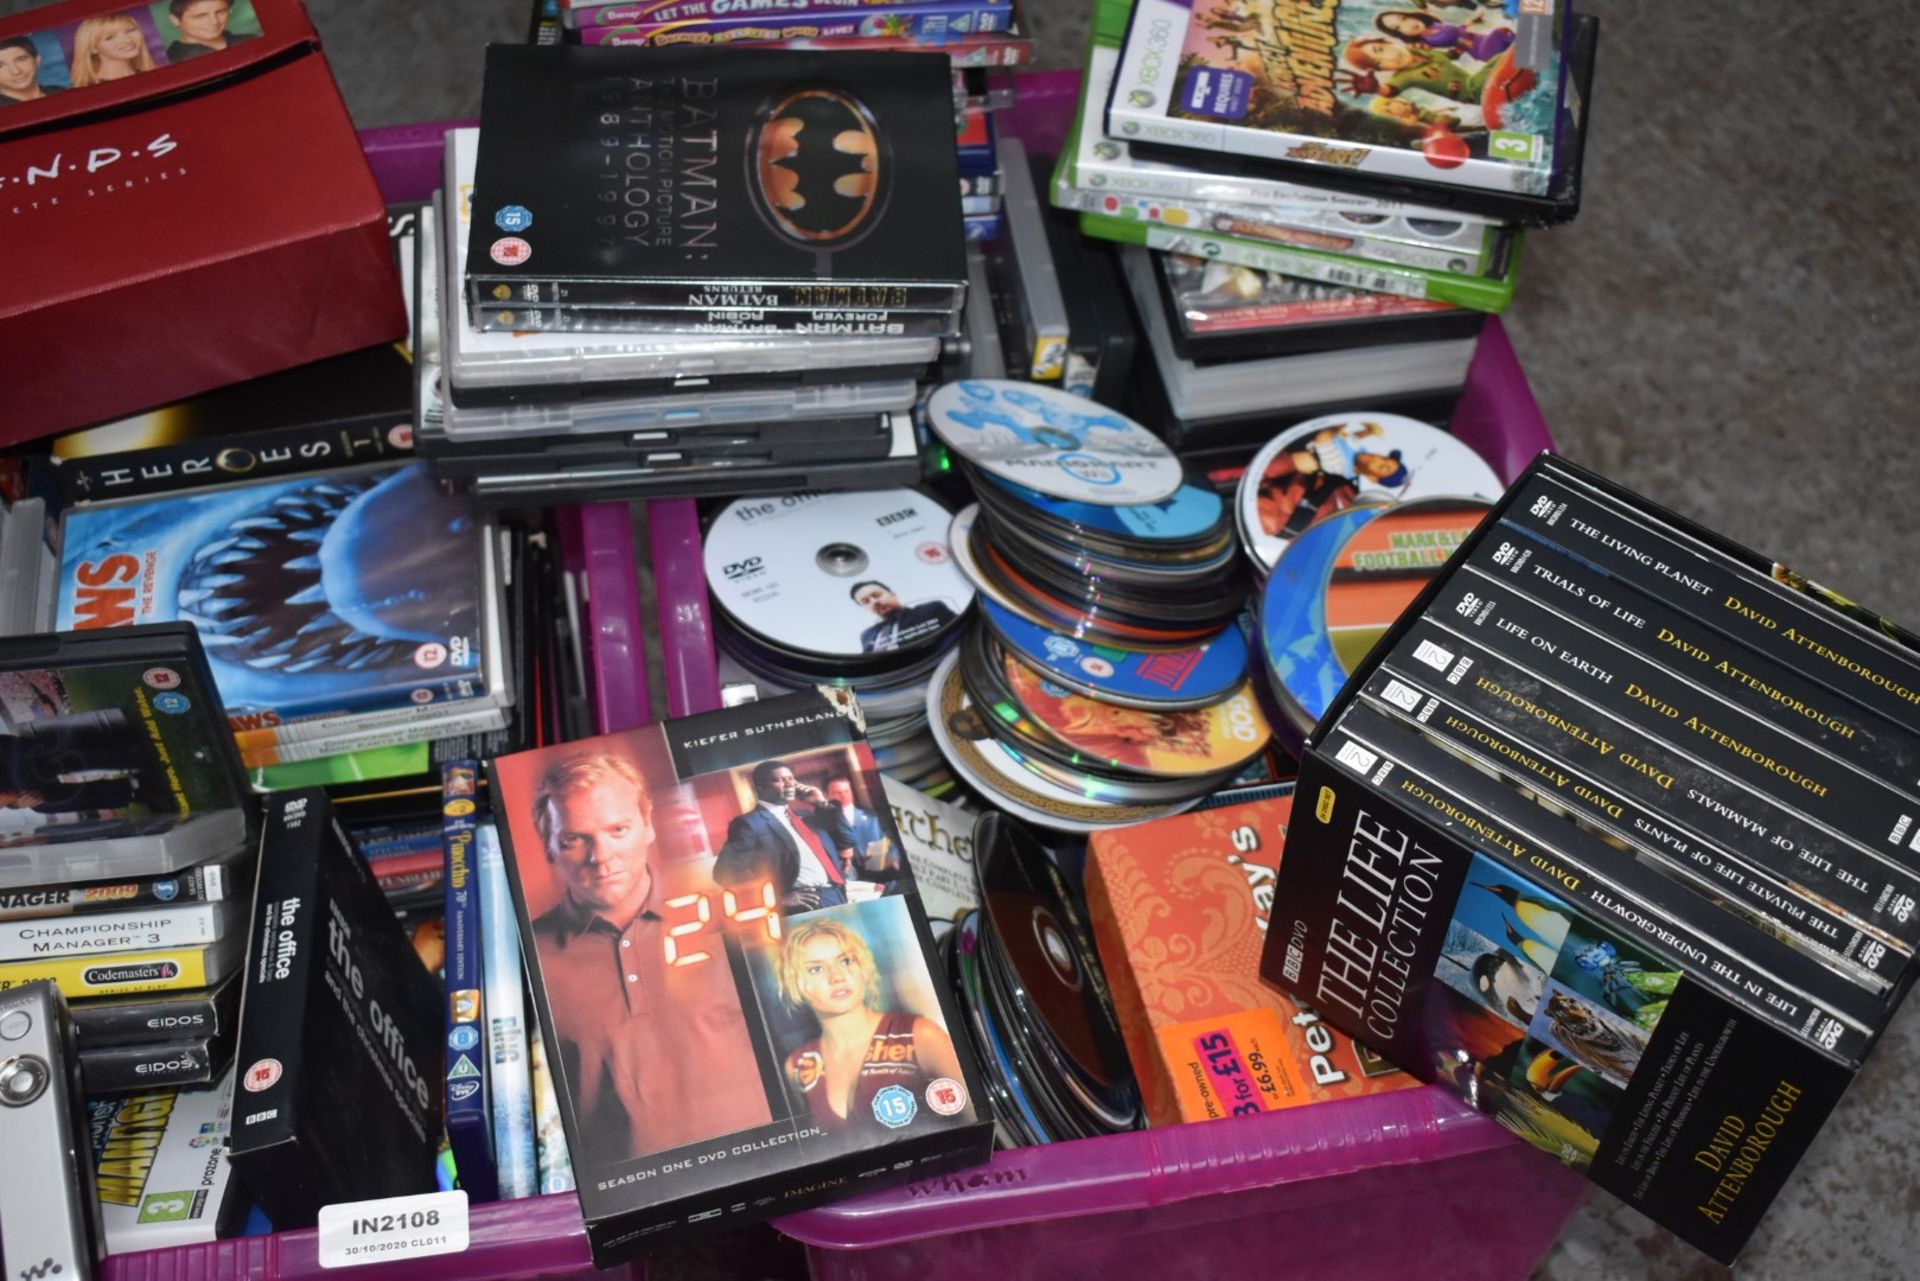 1 x Large Collection of DVD Films and Games - Plus Box Sets and Portable DVD Player - Ref: In2108 - Image 4 of 10